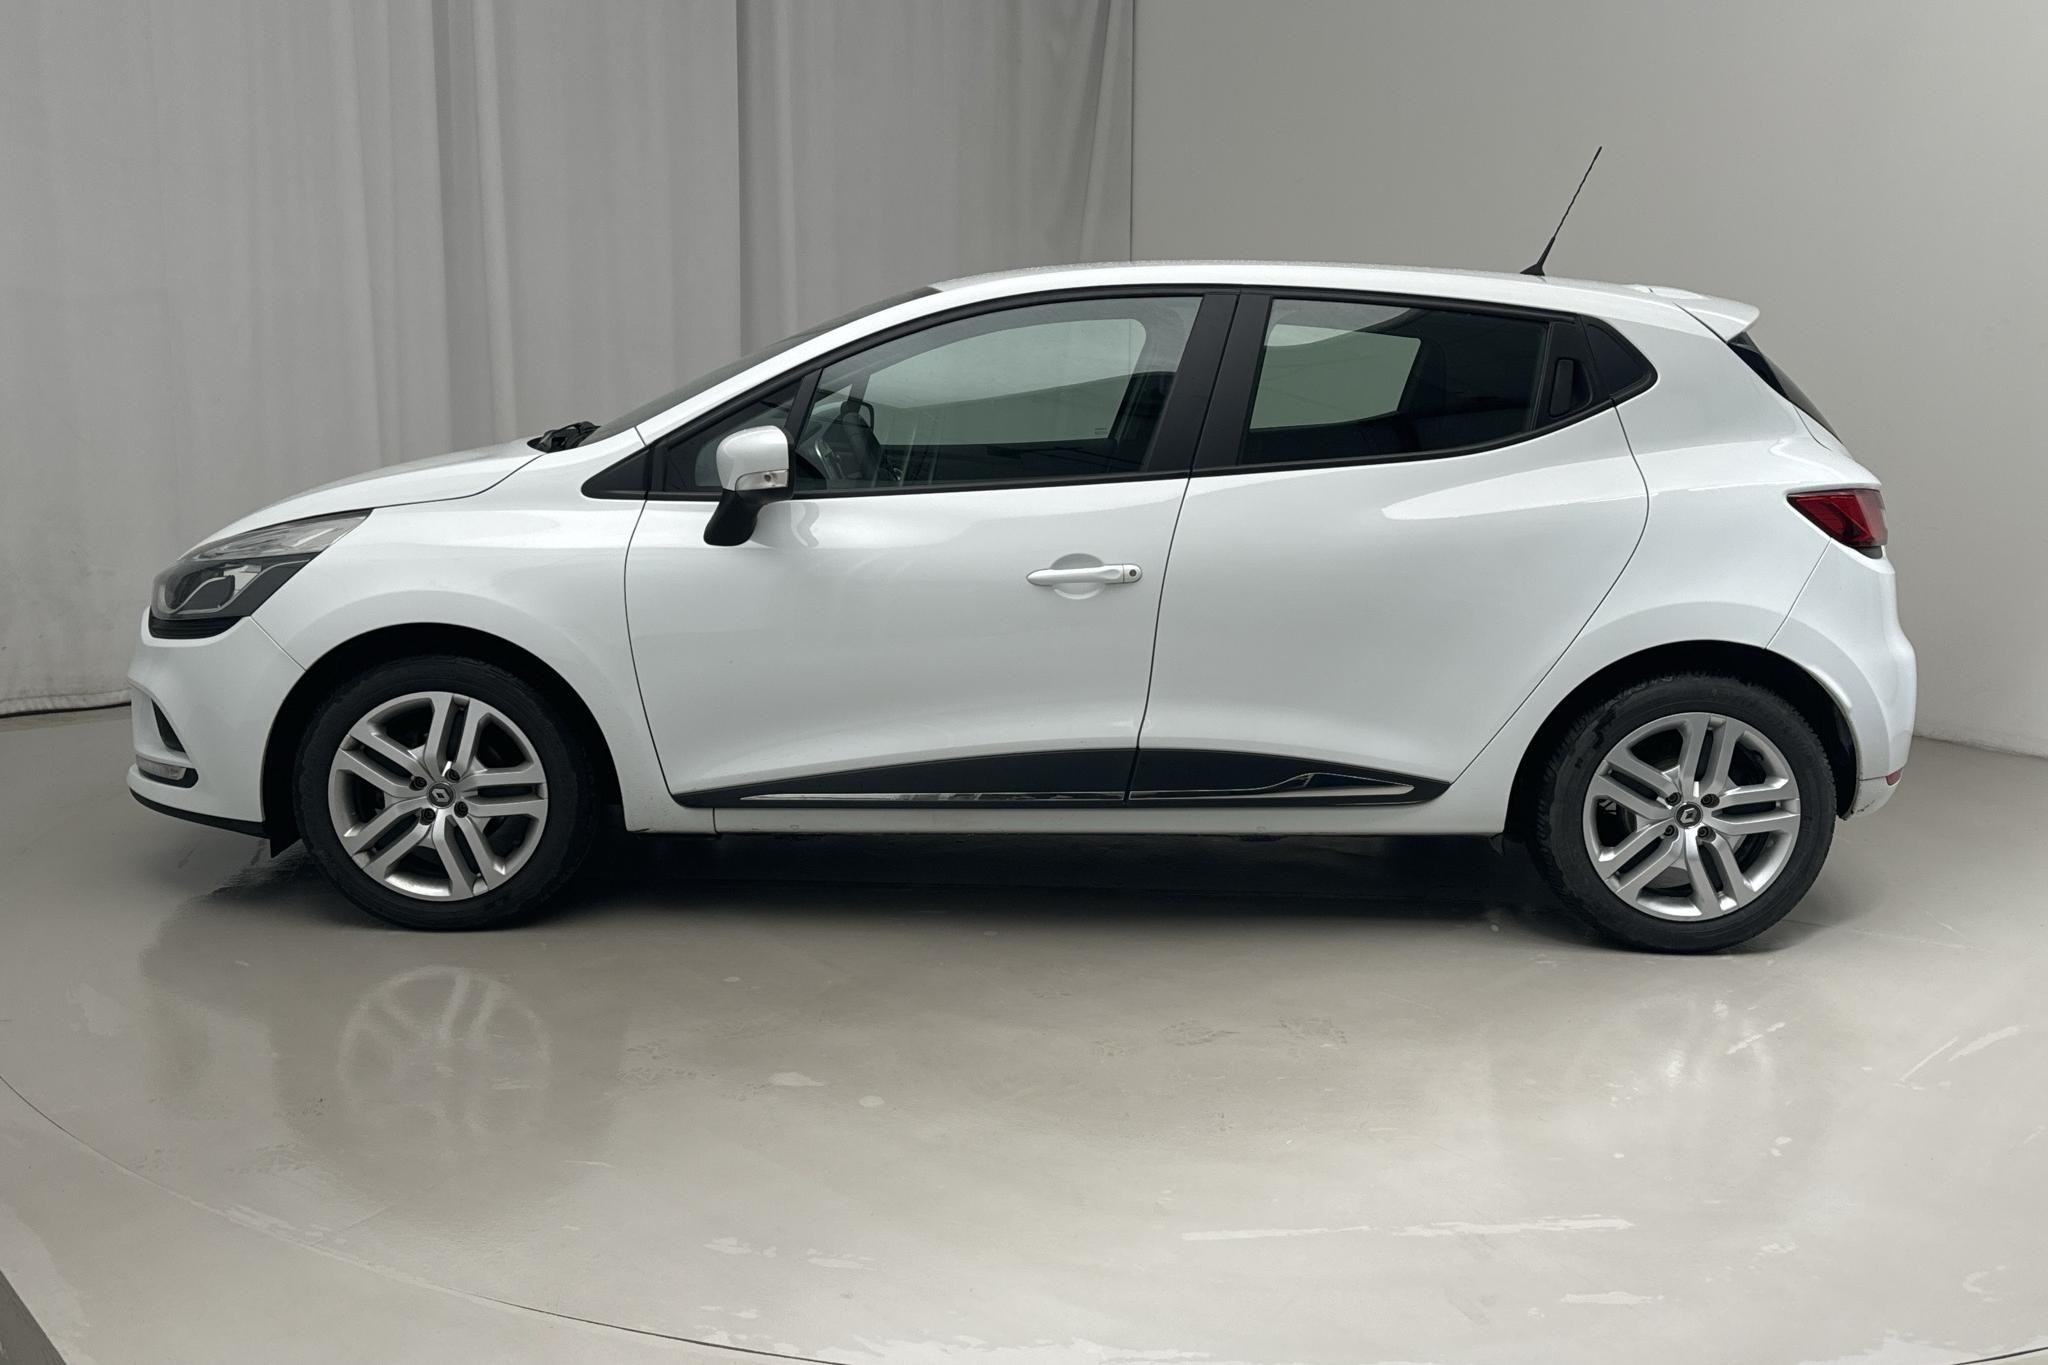 Renault Clio IV 0.9 TCe 90 5dr (90hk) - 93 400 km - Manual - white - 2019